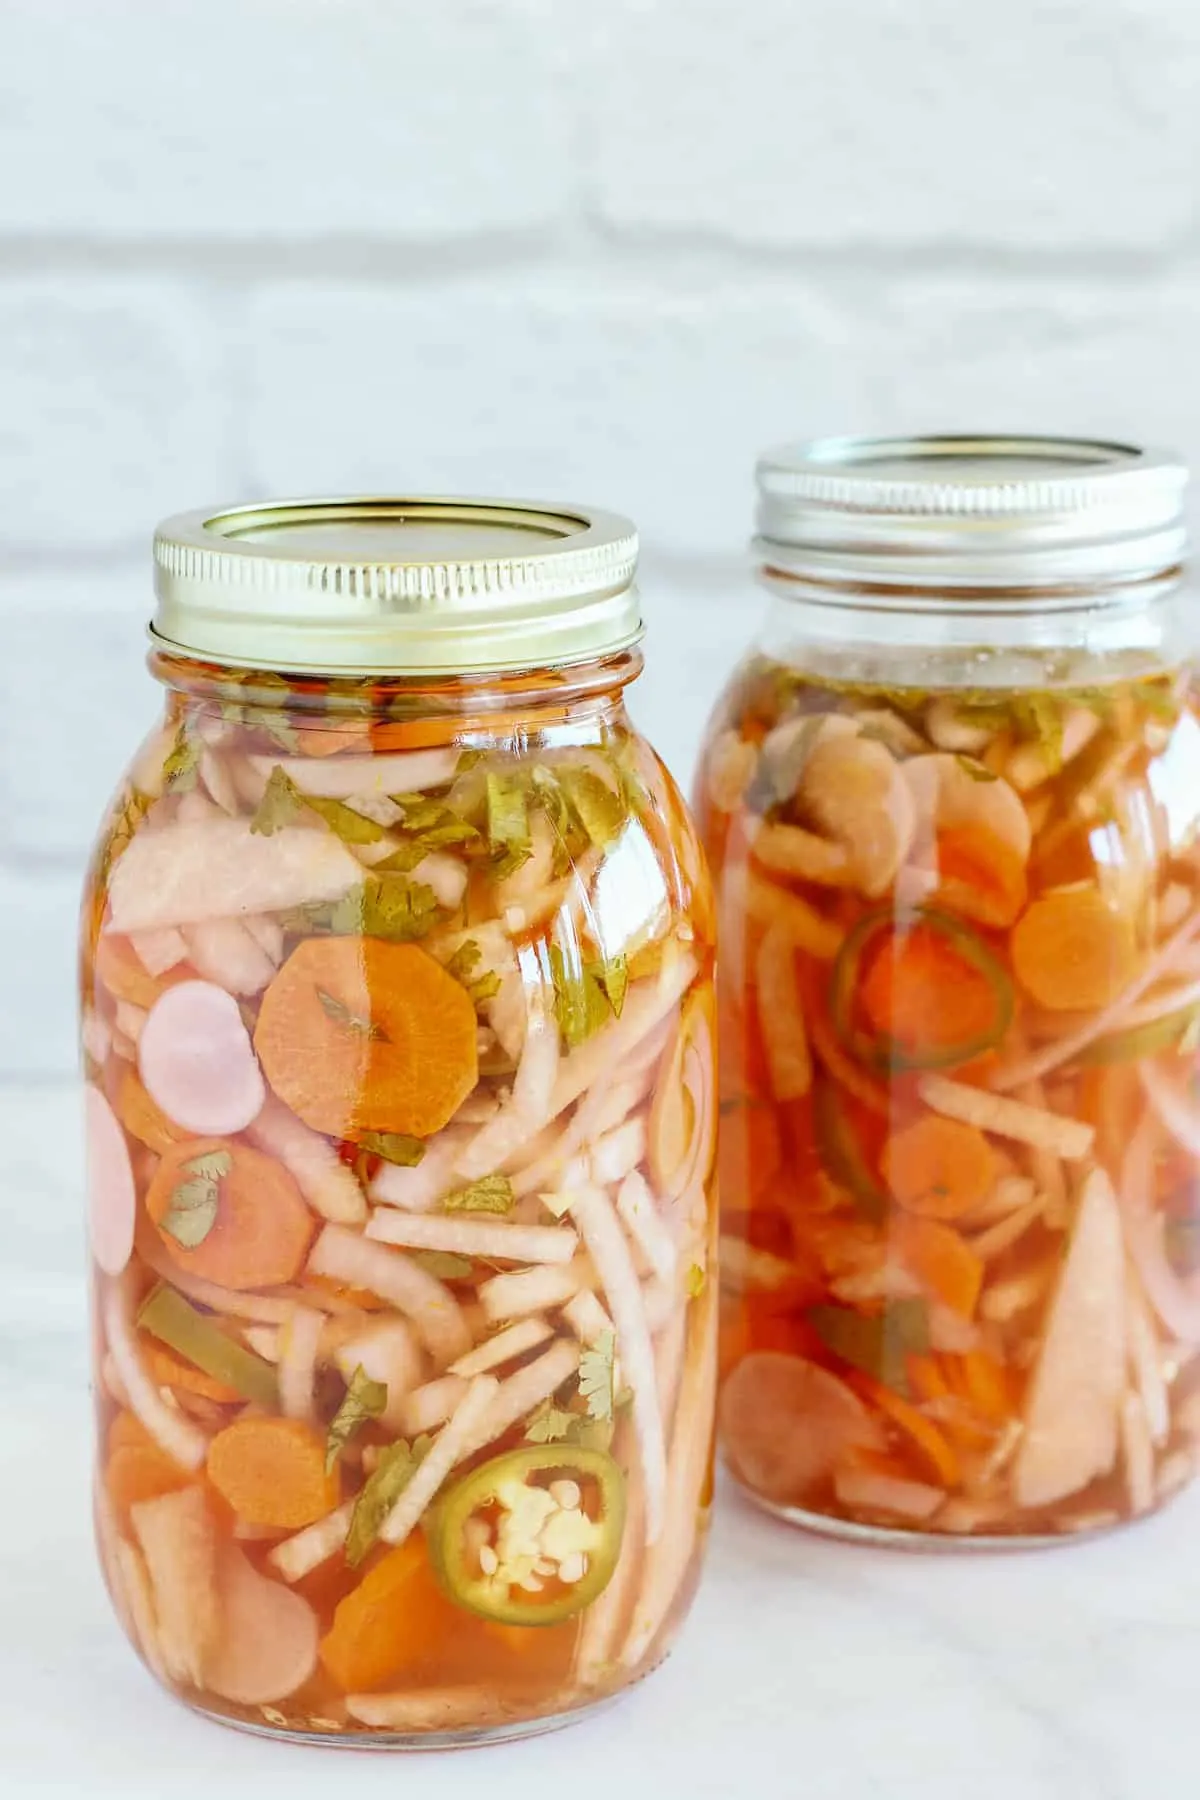 Two cans of mexican pickled vegetables.